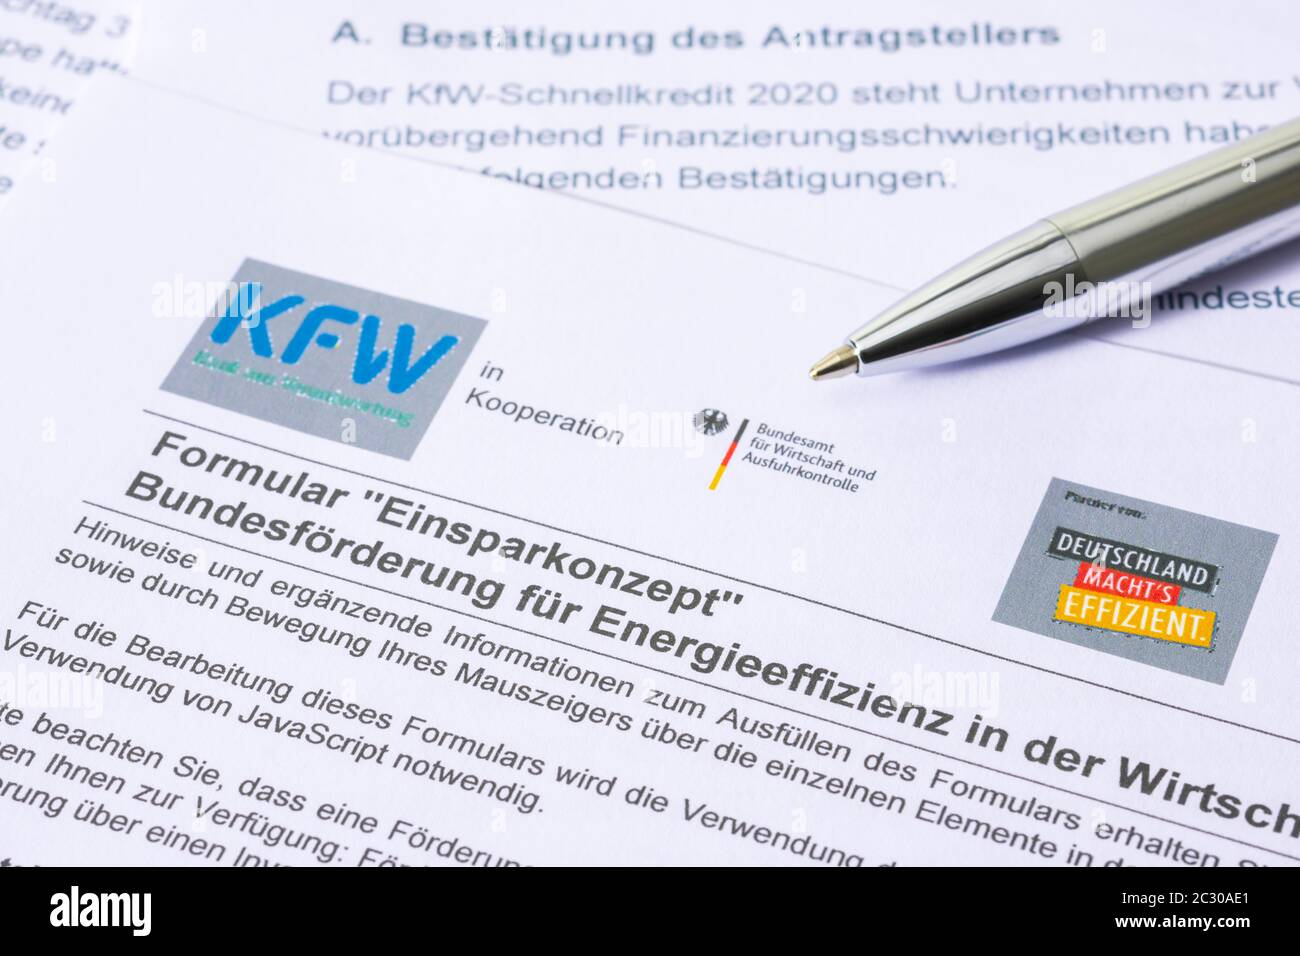 KfW-Foerderbank application forms, Savings Concept form Federal Promotion of Energy Efficiency in the Economy, Germany Stock Photo